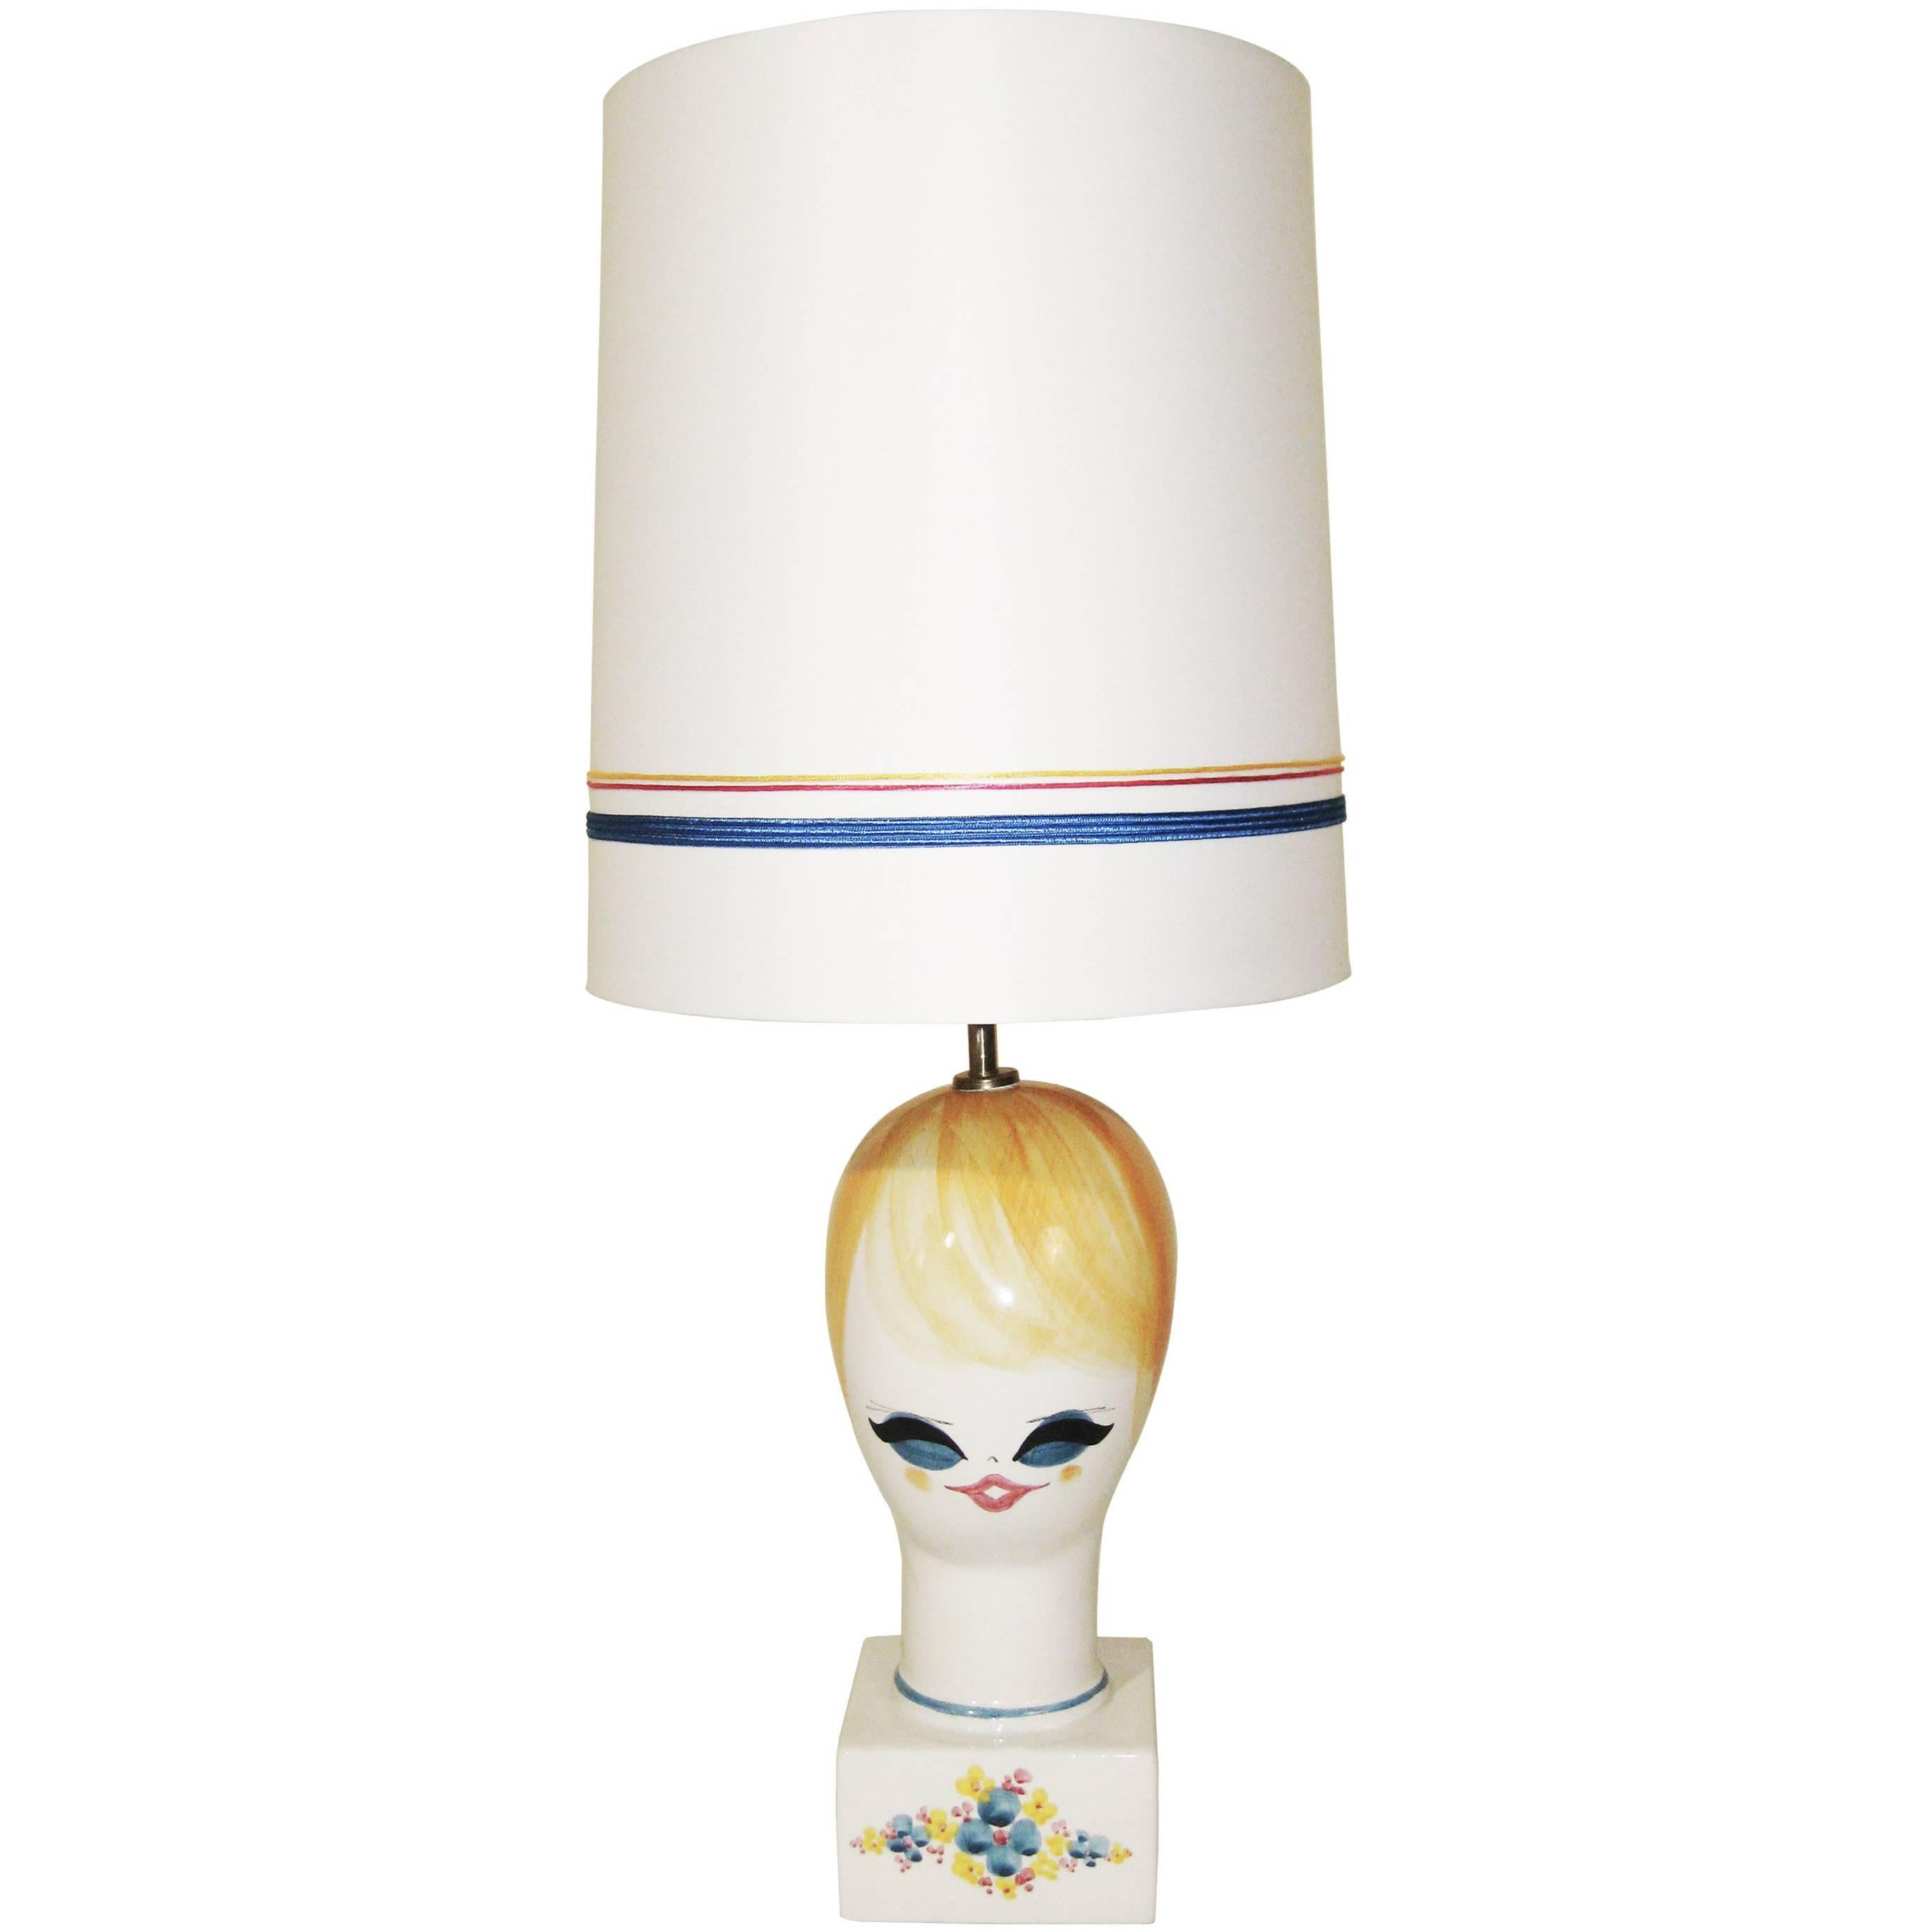 Midcentury Ceramic Hand-Painted Table Lamp, Italy, circa 1970 For Sale